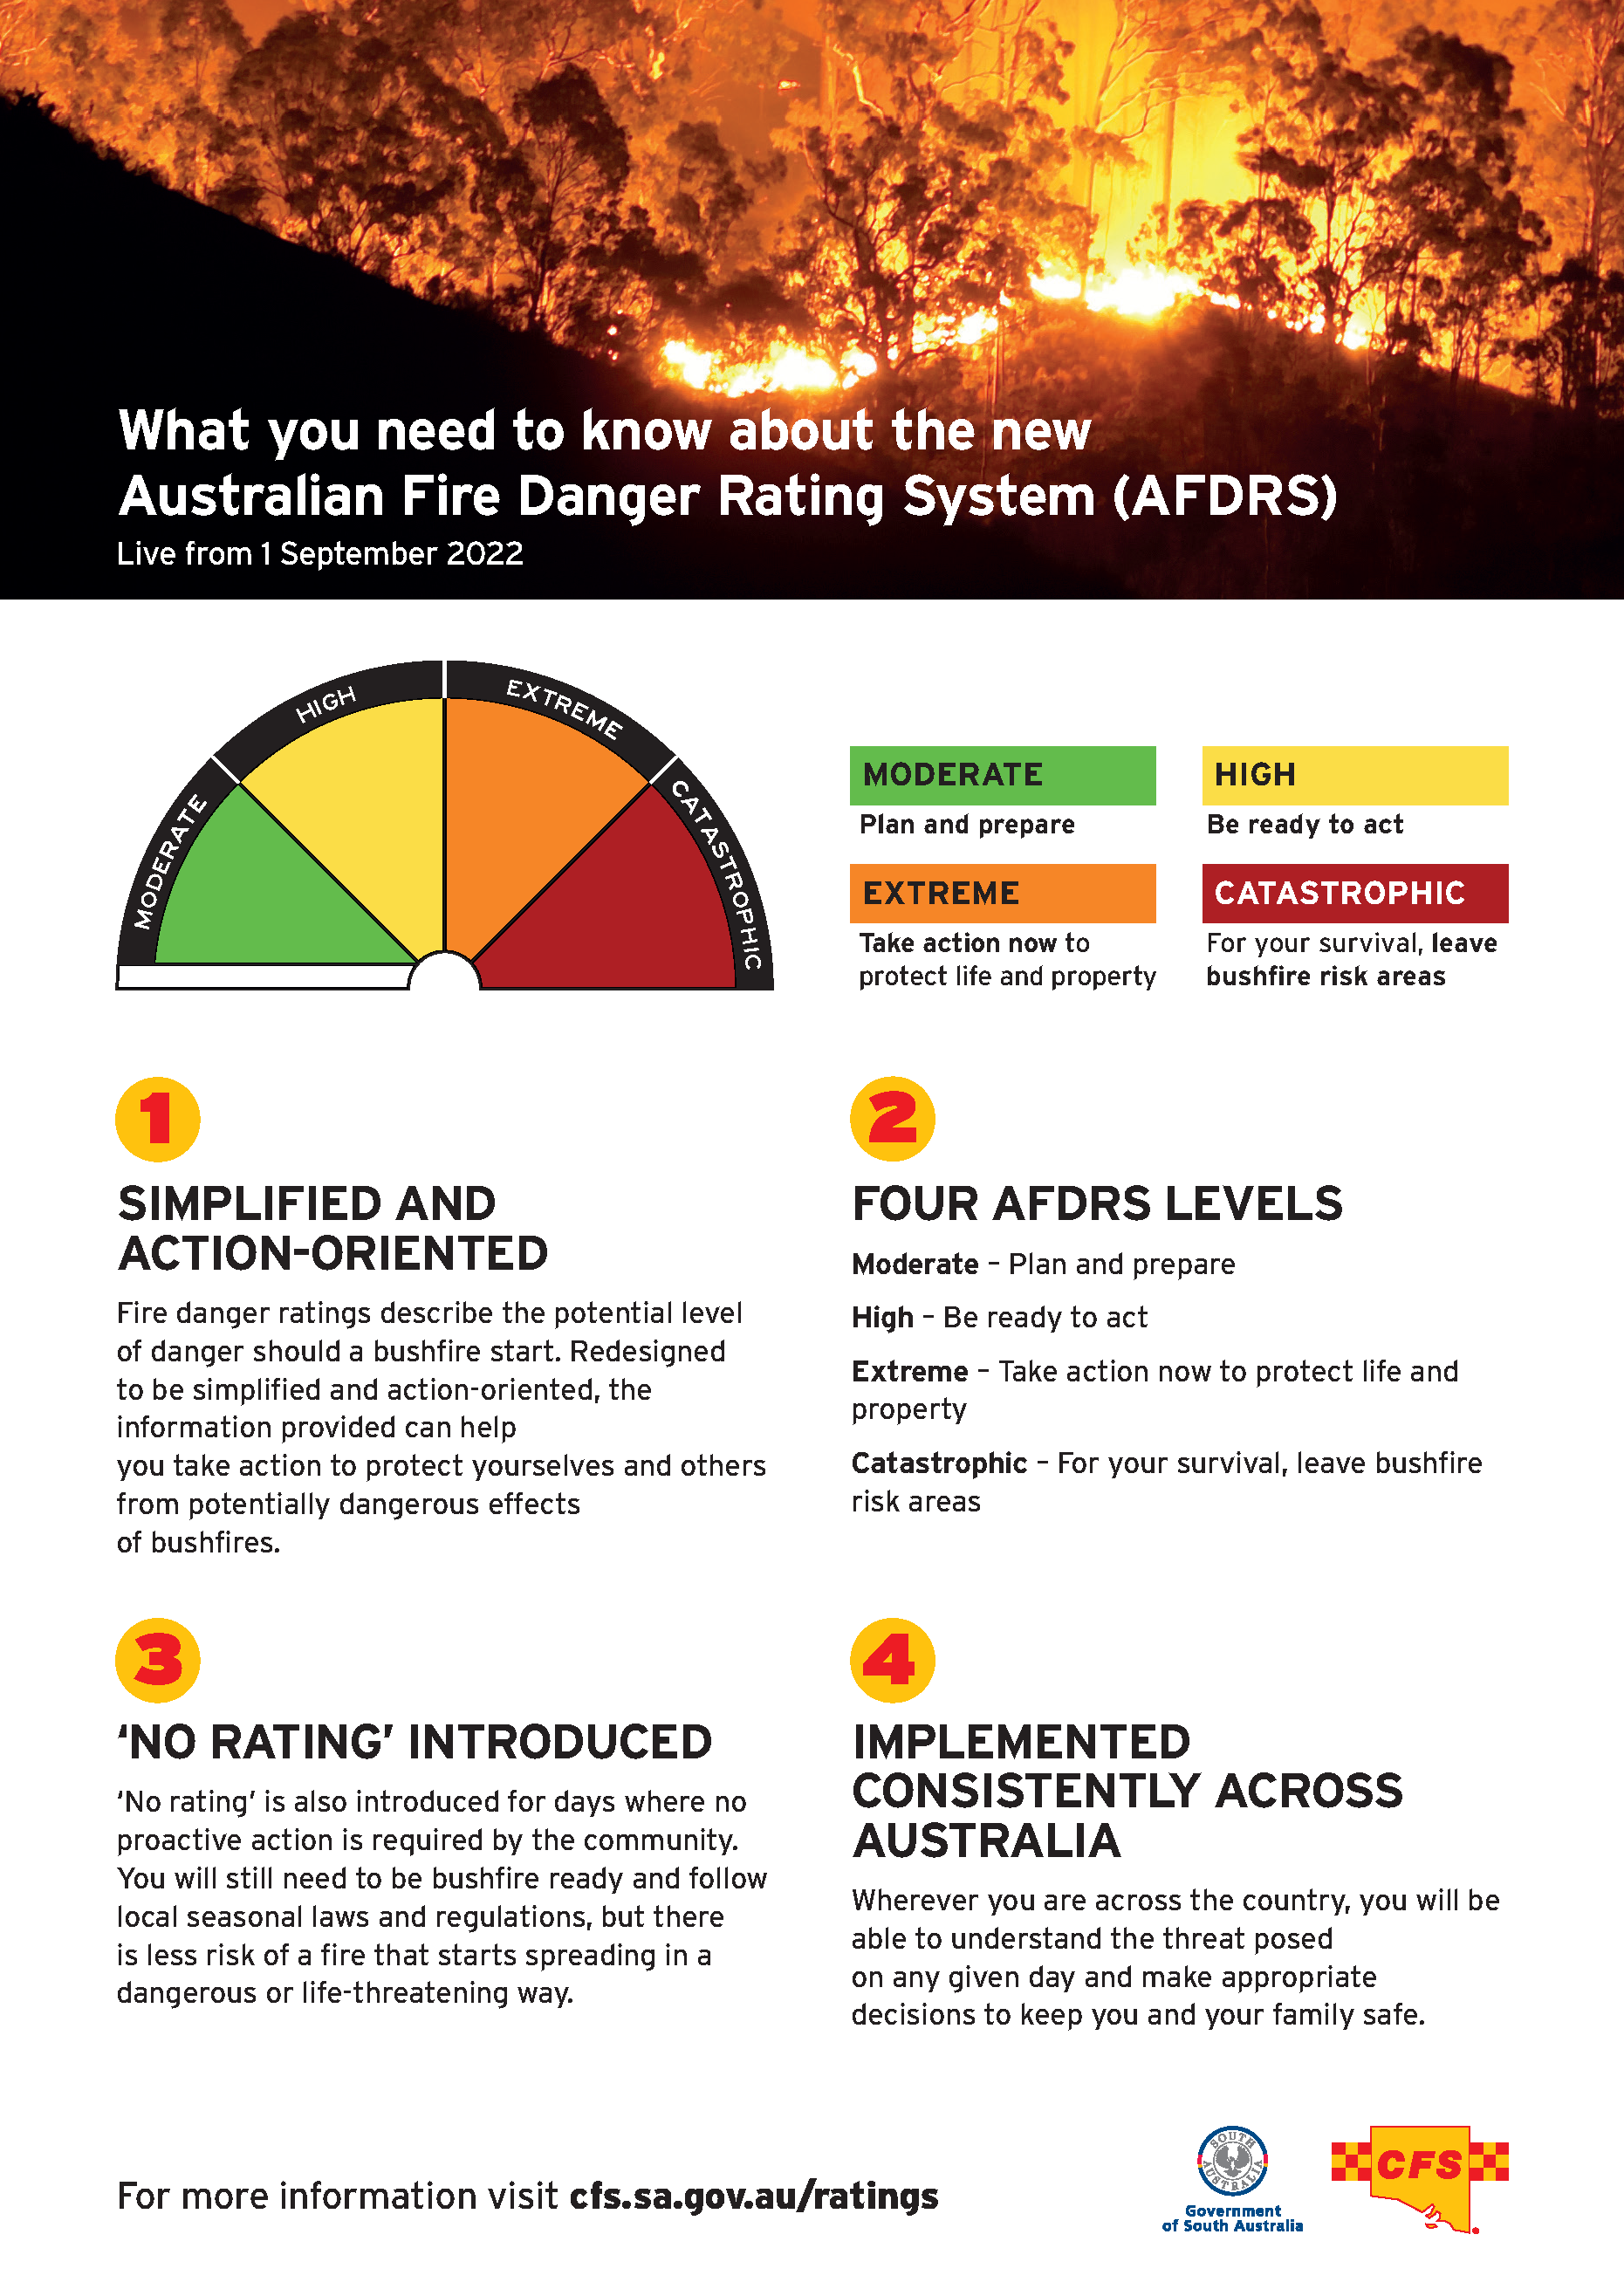 What you need to know about the new Australian Fire Danger Rating System (AFDRS)  Live from 1 September 2022 1. Simplified and Action-oriented  Fire danger ratings describe the potential level of danger should a bushfire start. Redesigned to be simplified and action-oriented, the information provided can help you take action to protect yourselves and others from potentially dangerous effects of bushfires. 2. Four AFDRS Levels  Moderate – Plan and prepare  High – Be ready to act  Extreme – Take action now to protect life and property  Catastrophic – For your survival, leave bushfire risk areas 3. 'No Rating' Introduced  'No rathing' is also introduced for days where no proactive action is required by the community. You will still need to be bushfire ready and follow local seasonal laws and regulations, but there is less risk of a fire that starts spreading in a dangerous or life-threatening way. 4. Implemented Consistently Across Australia  Wherever you are across the country, you will be able to understand the threat posed on any given day and make appropriate decisions to keep you and your family safe.  For more information visit cfs.sa.gov.au/ratings